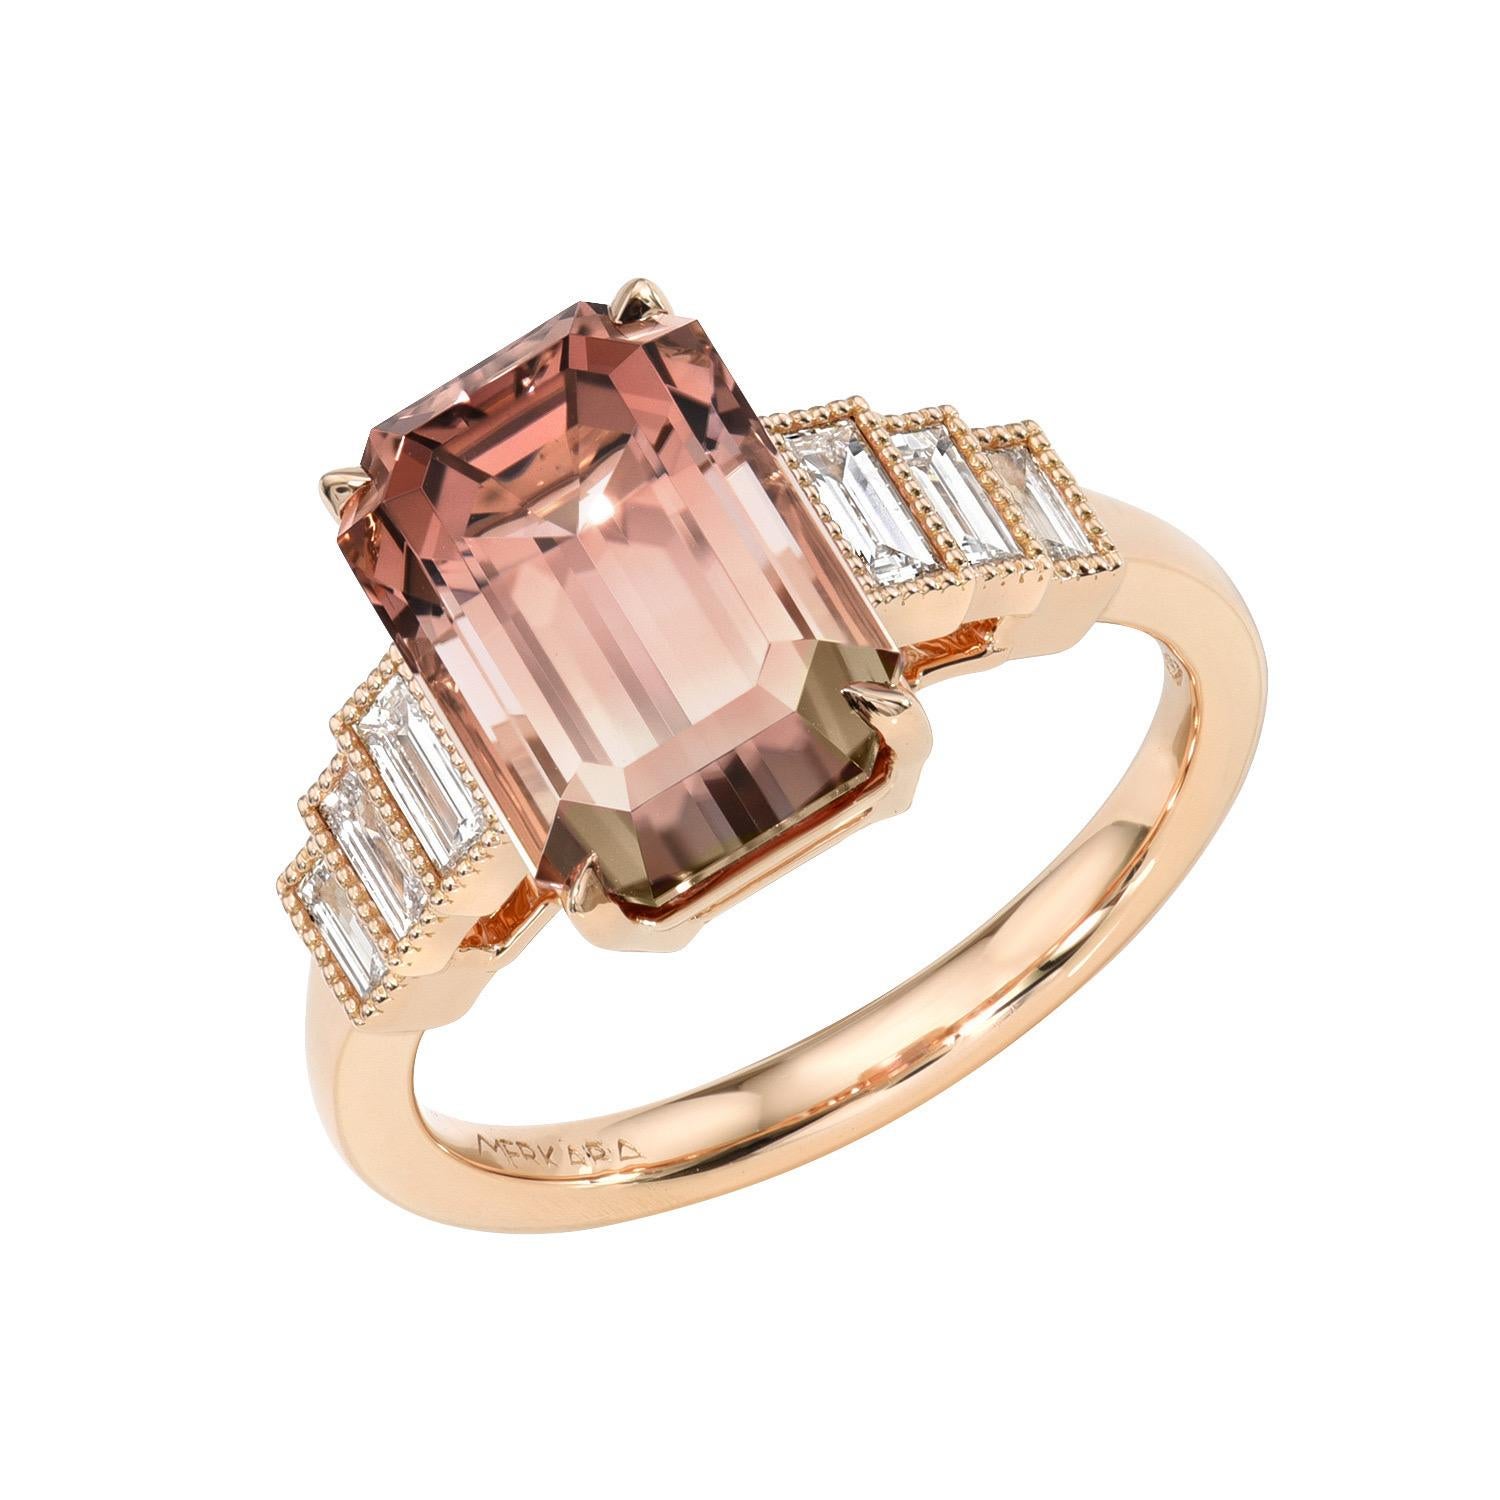 Remarkable Bicolor Tourmaline 5.07 carat Emerald Cut, 18K rose gold ring, decorated with a total of 0.39 carat collection baguette diamonds.
Ring size 6.5. Resizing is complementary upon request.
Returns are accepted and paid by us within 7 days of